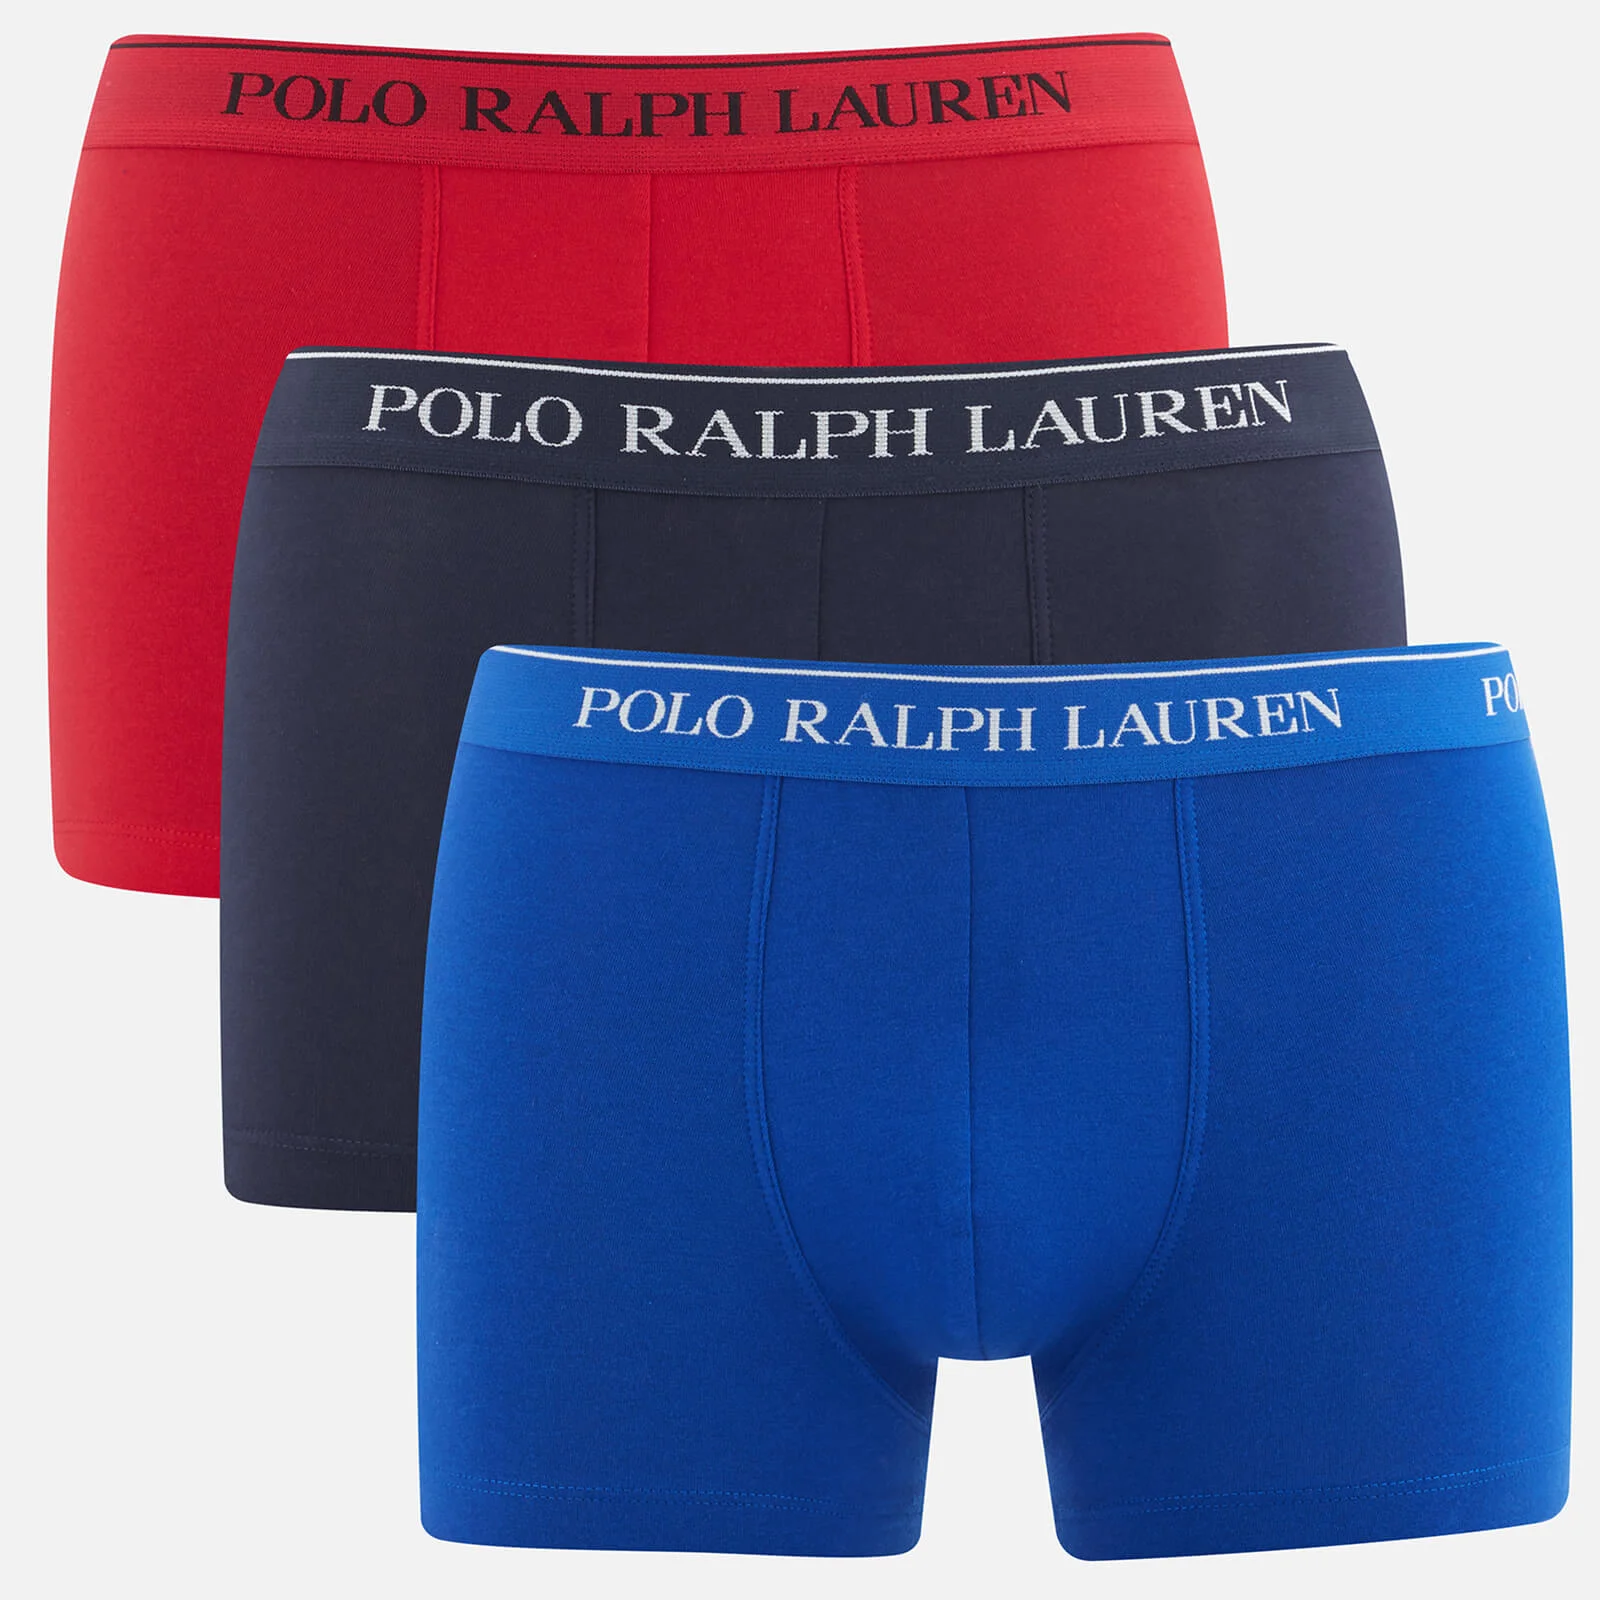 Polo Ralph Lauren Men's Classic 3 Pack Trunk Boxer Shorts - Navy/Sapphire Star/Red Image 1